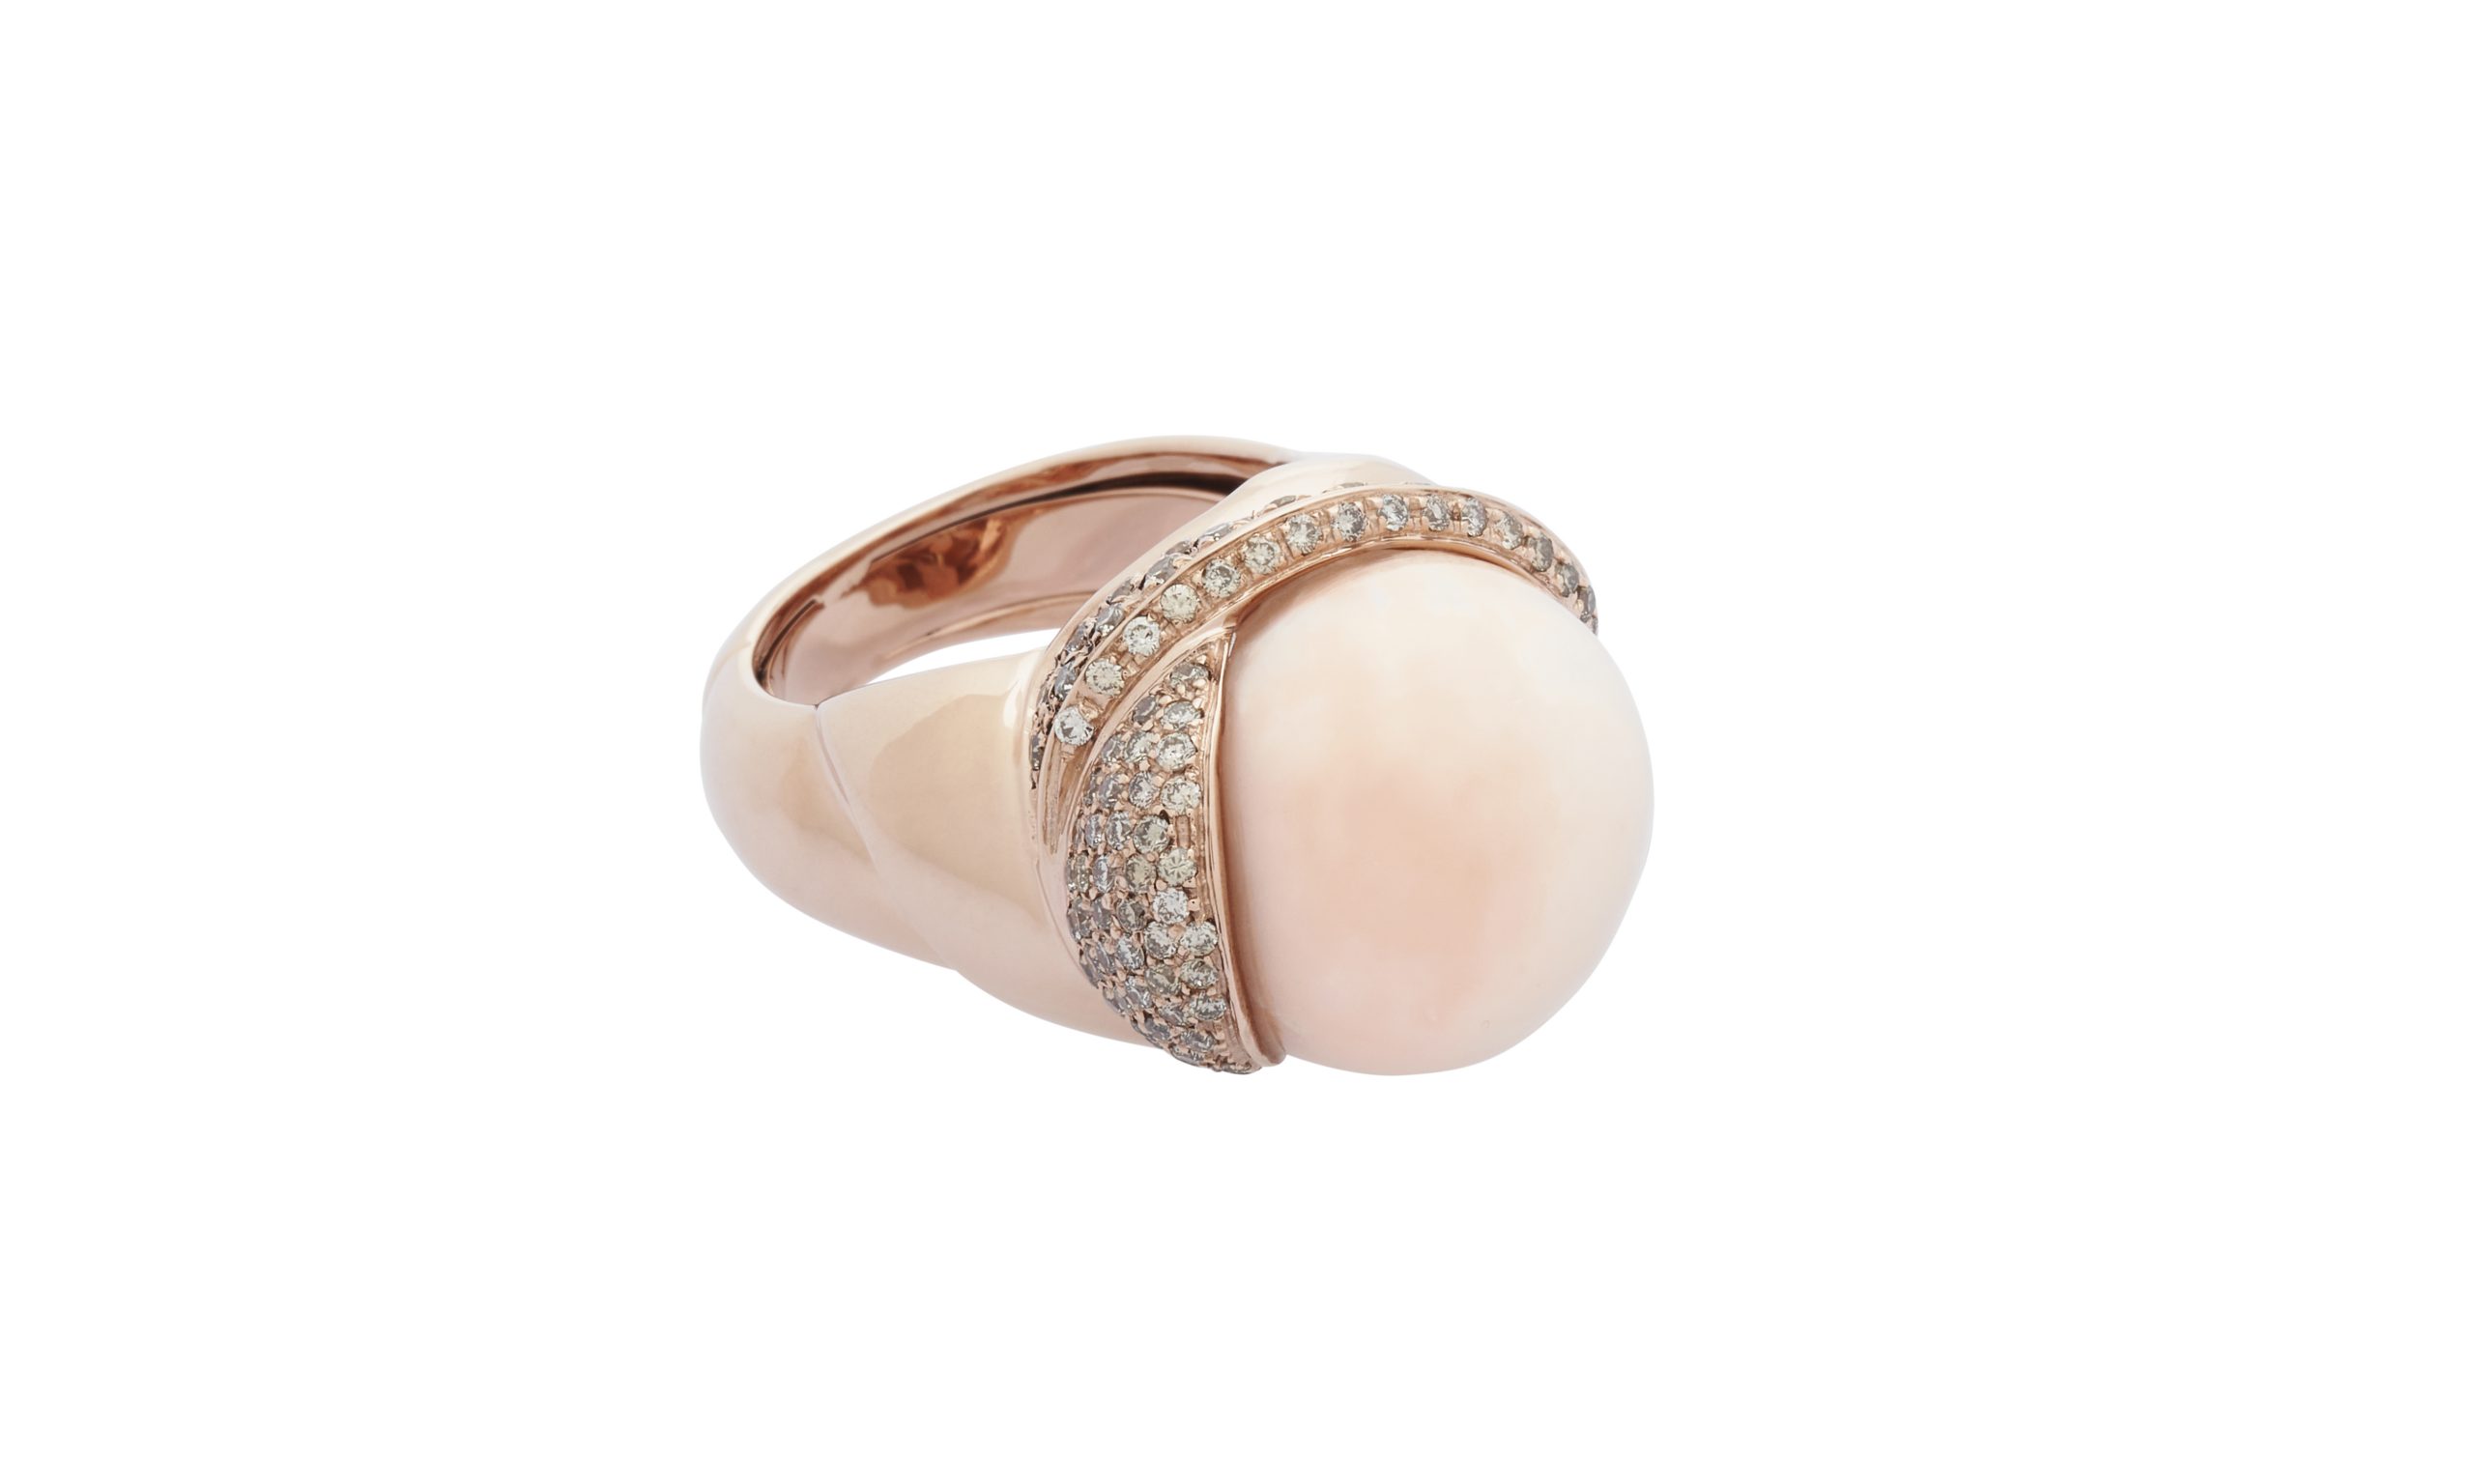 Ring PEAU D'ANGE. Pink Gold with Pink Coral (Angel's Skin) and Brown Diamonds.